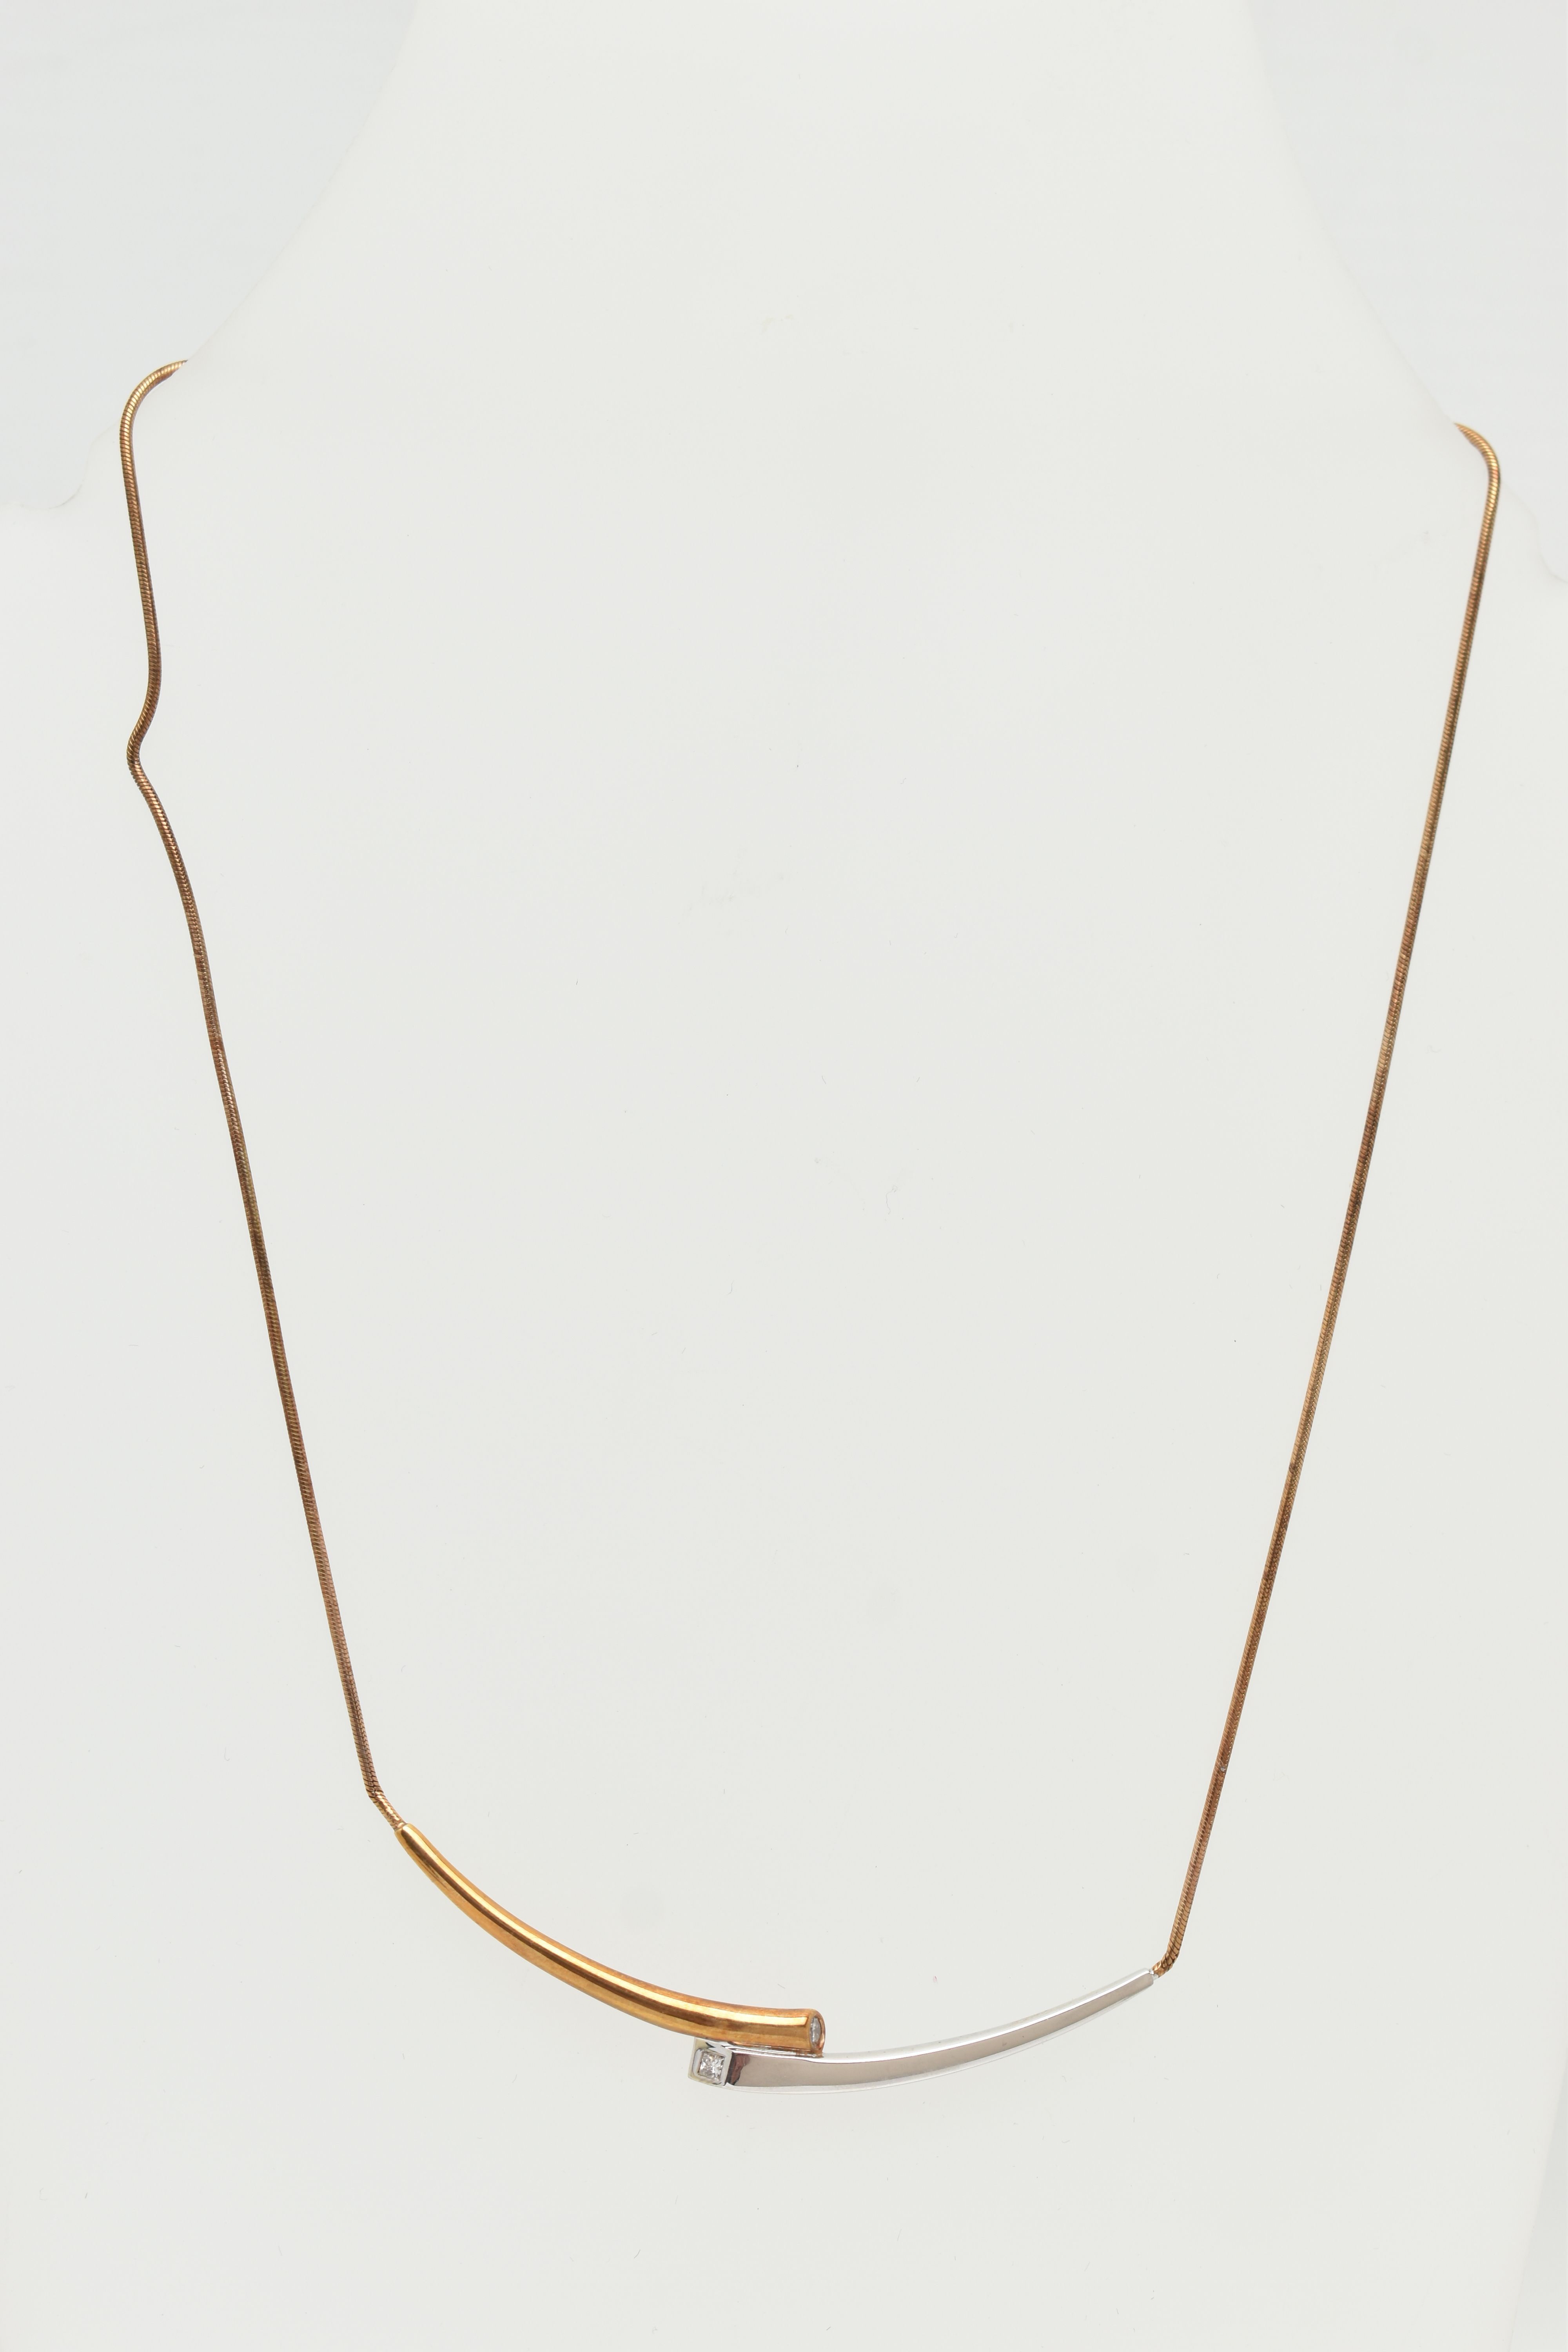 A 9CT GOLD 'ROYAL MINT' 'CONNECTIONS COLLARETTE' NECKLACE, a bicolor bypass style necklace, flush - Image 2 of 8